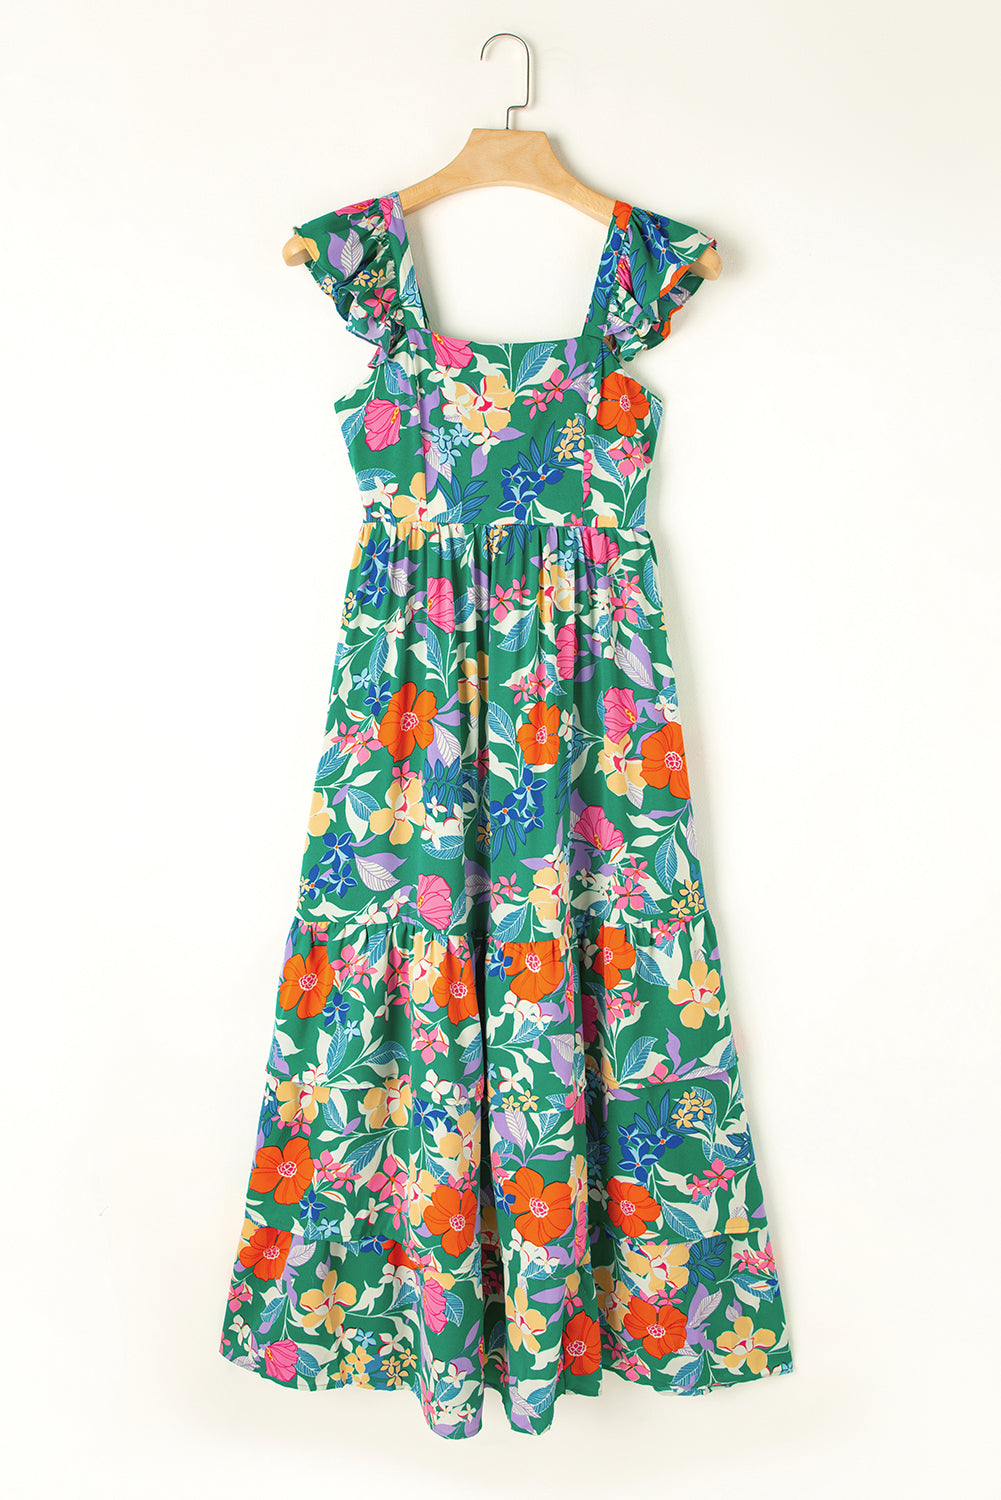 Blue Zone Planet |  Green Floral Print Sleeveless Ruffle Tiered Maxi Dress Blue Zone Planet